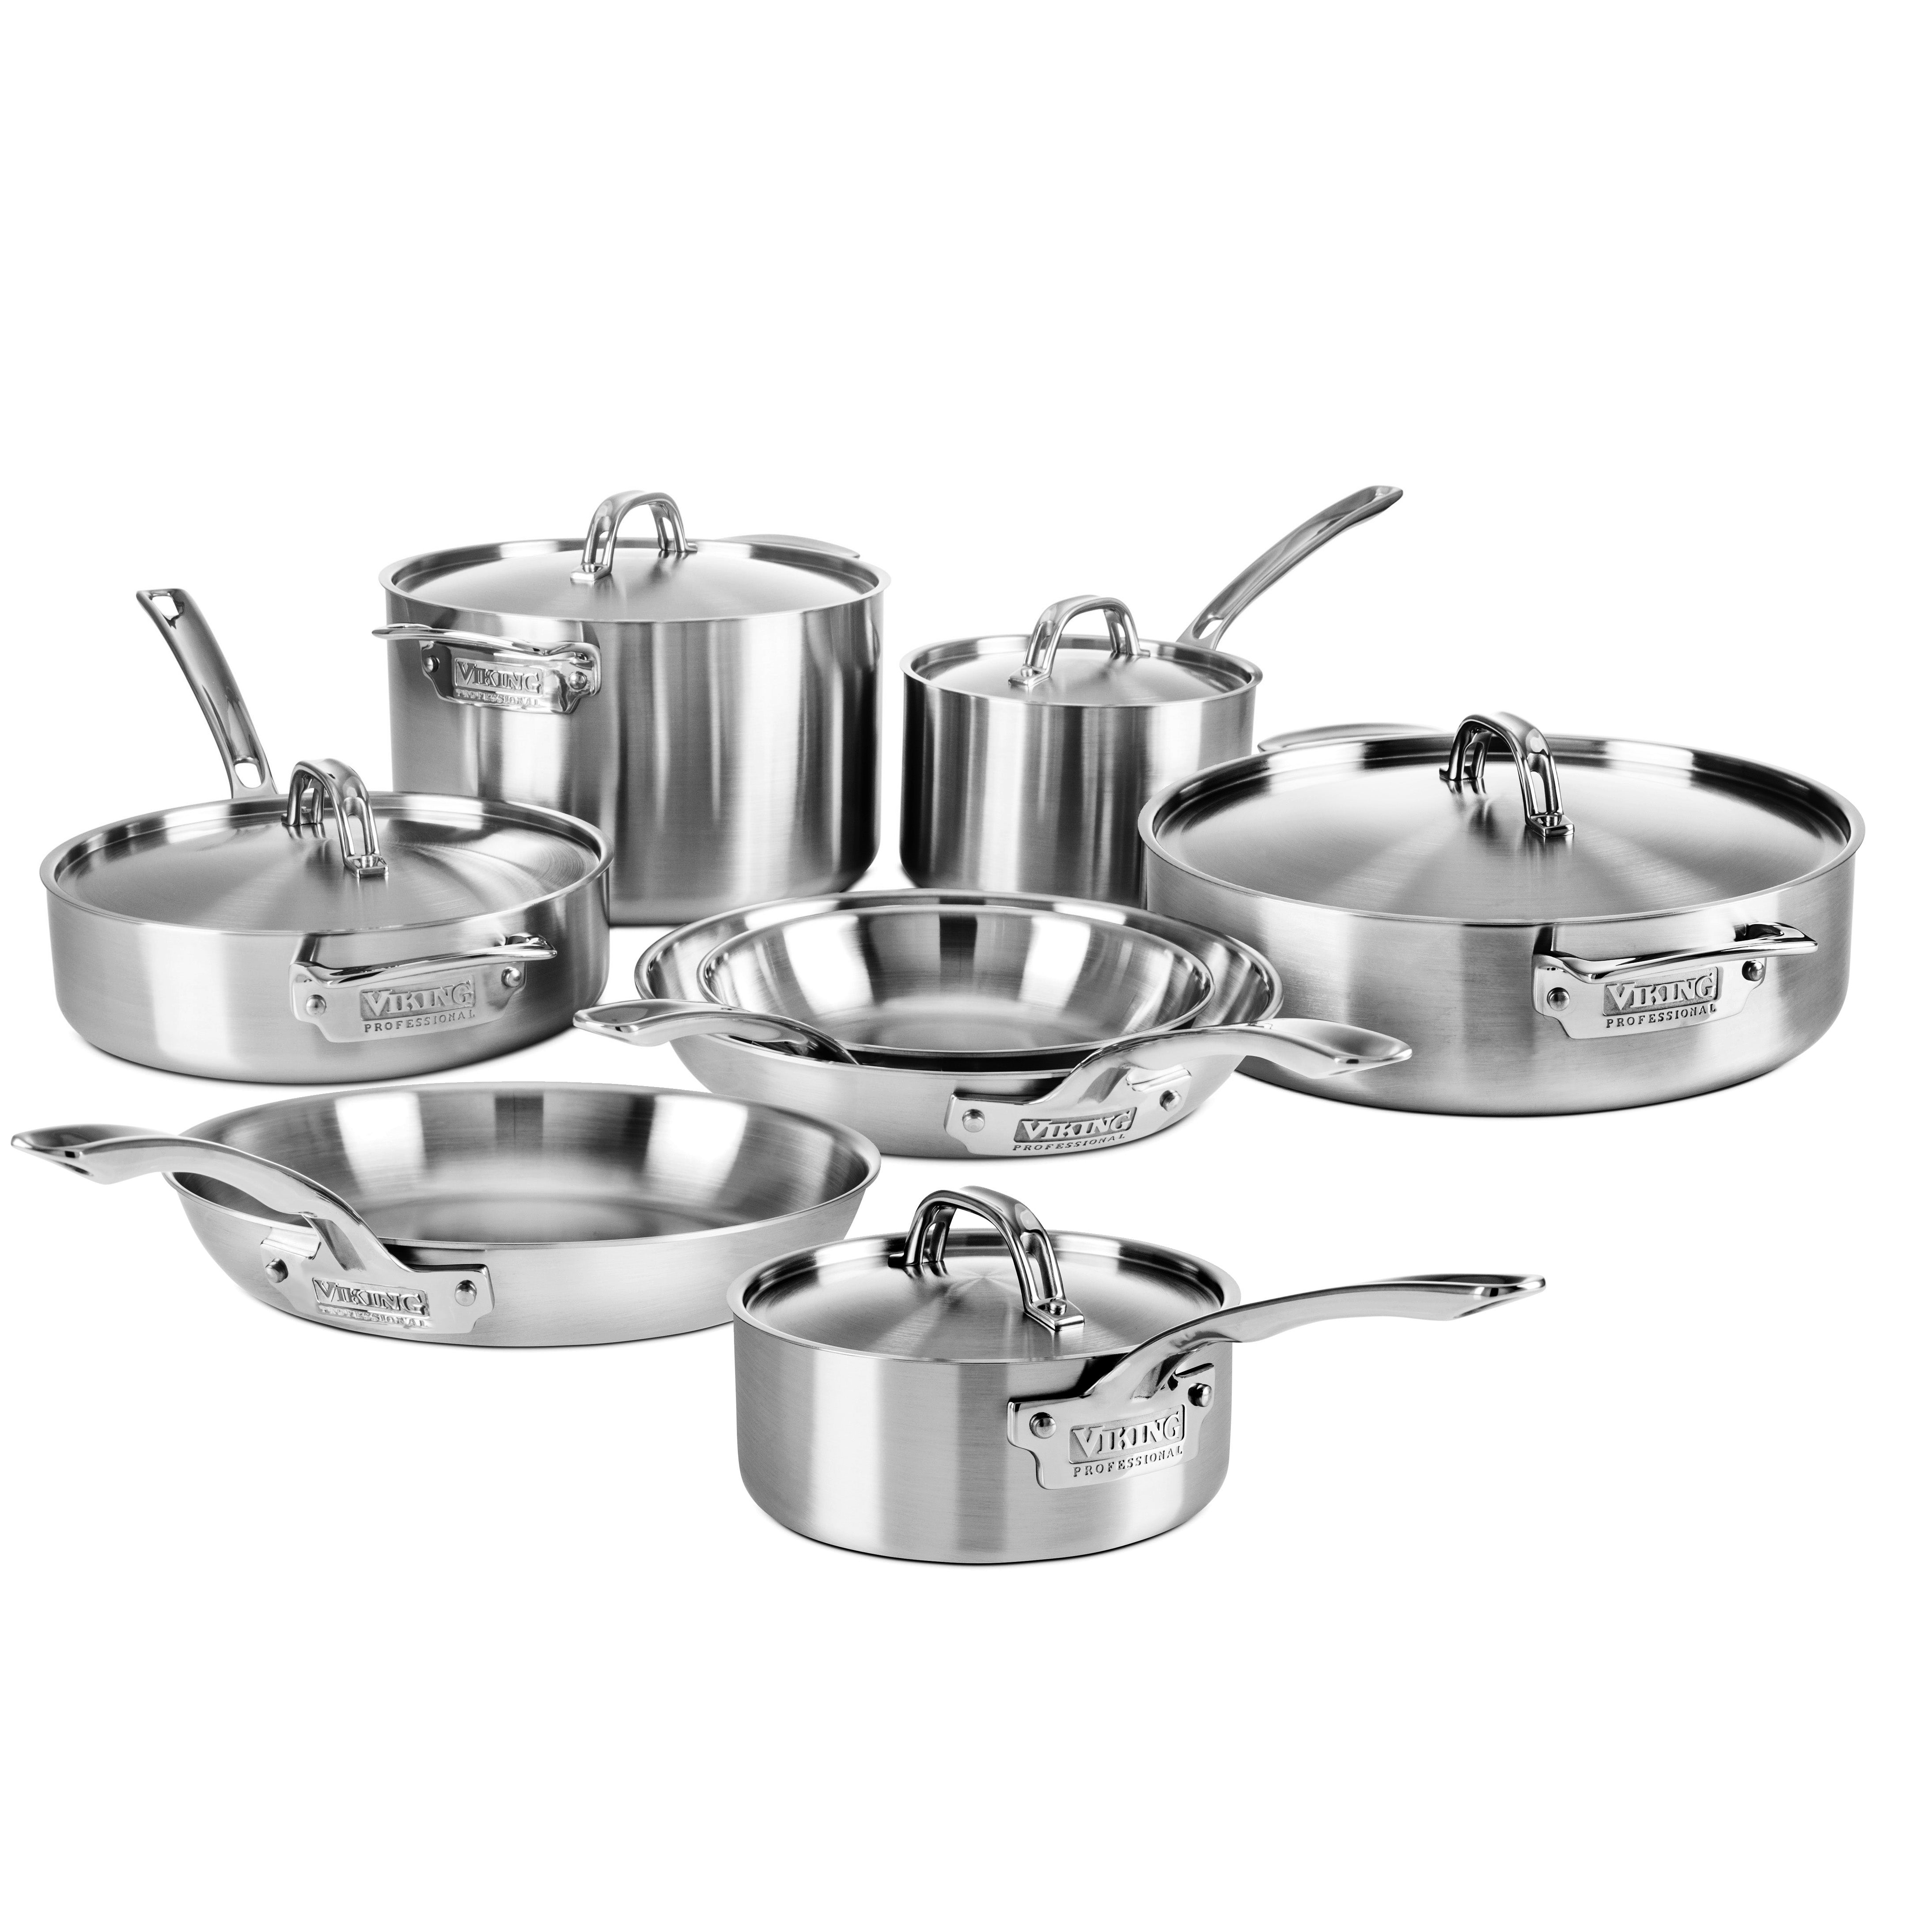 Viking Cookware Set - 13 Piece - Professional 5-ply Stainless